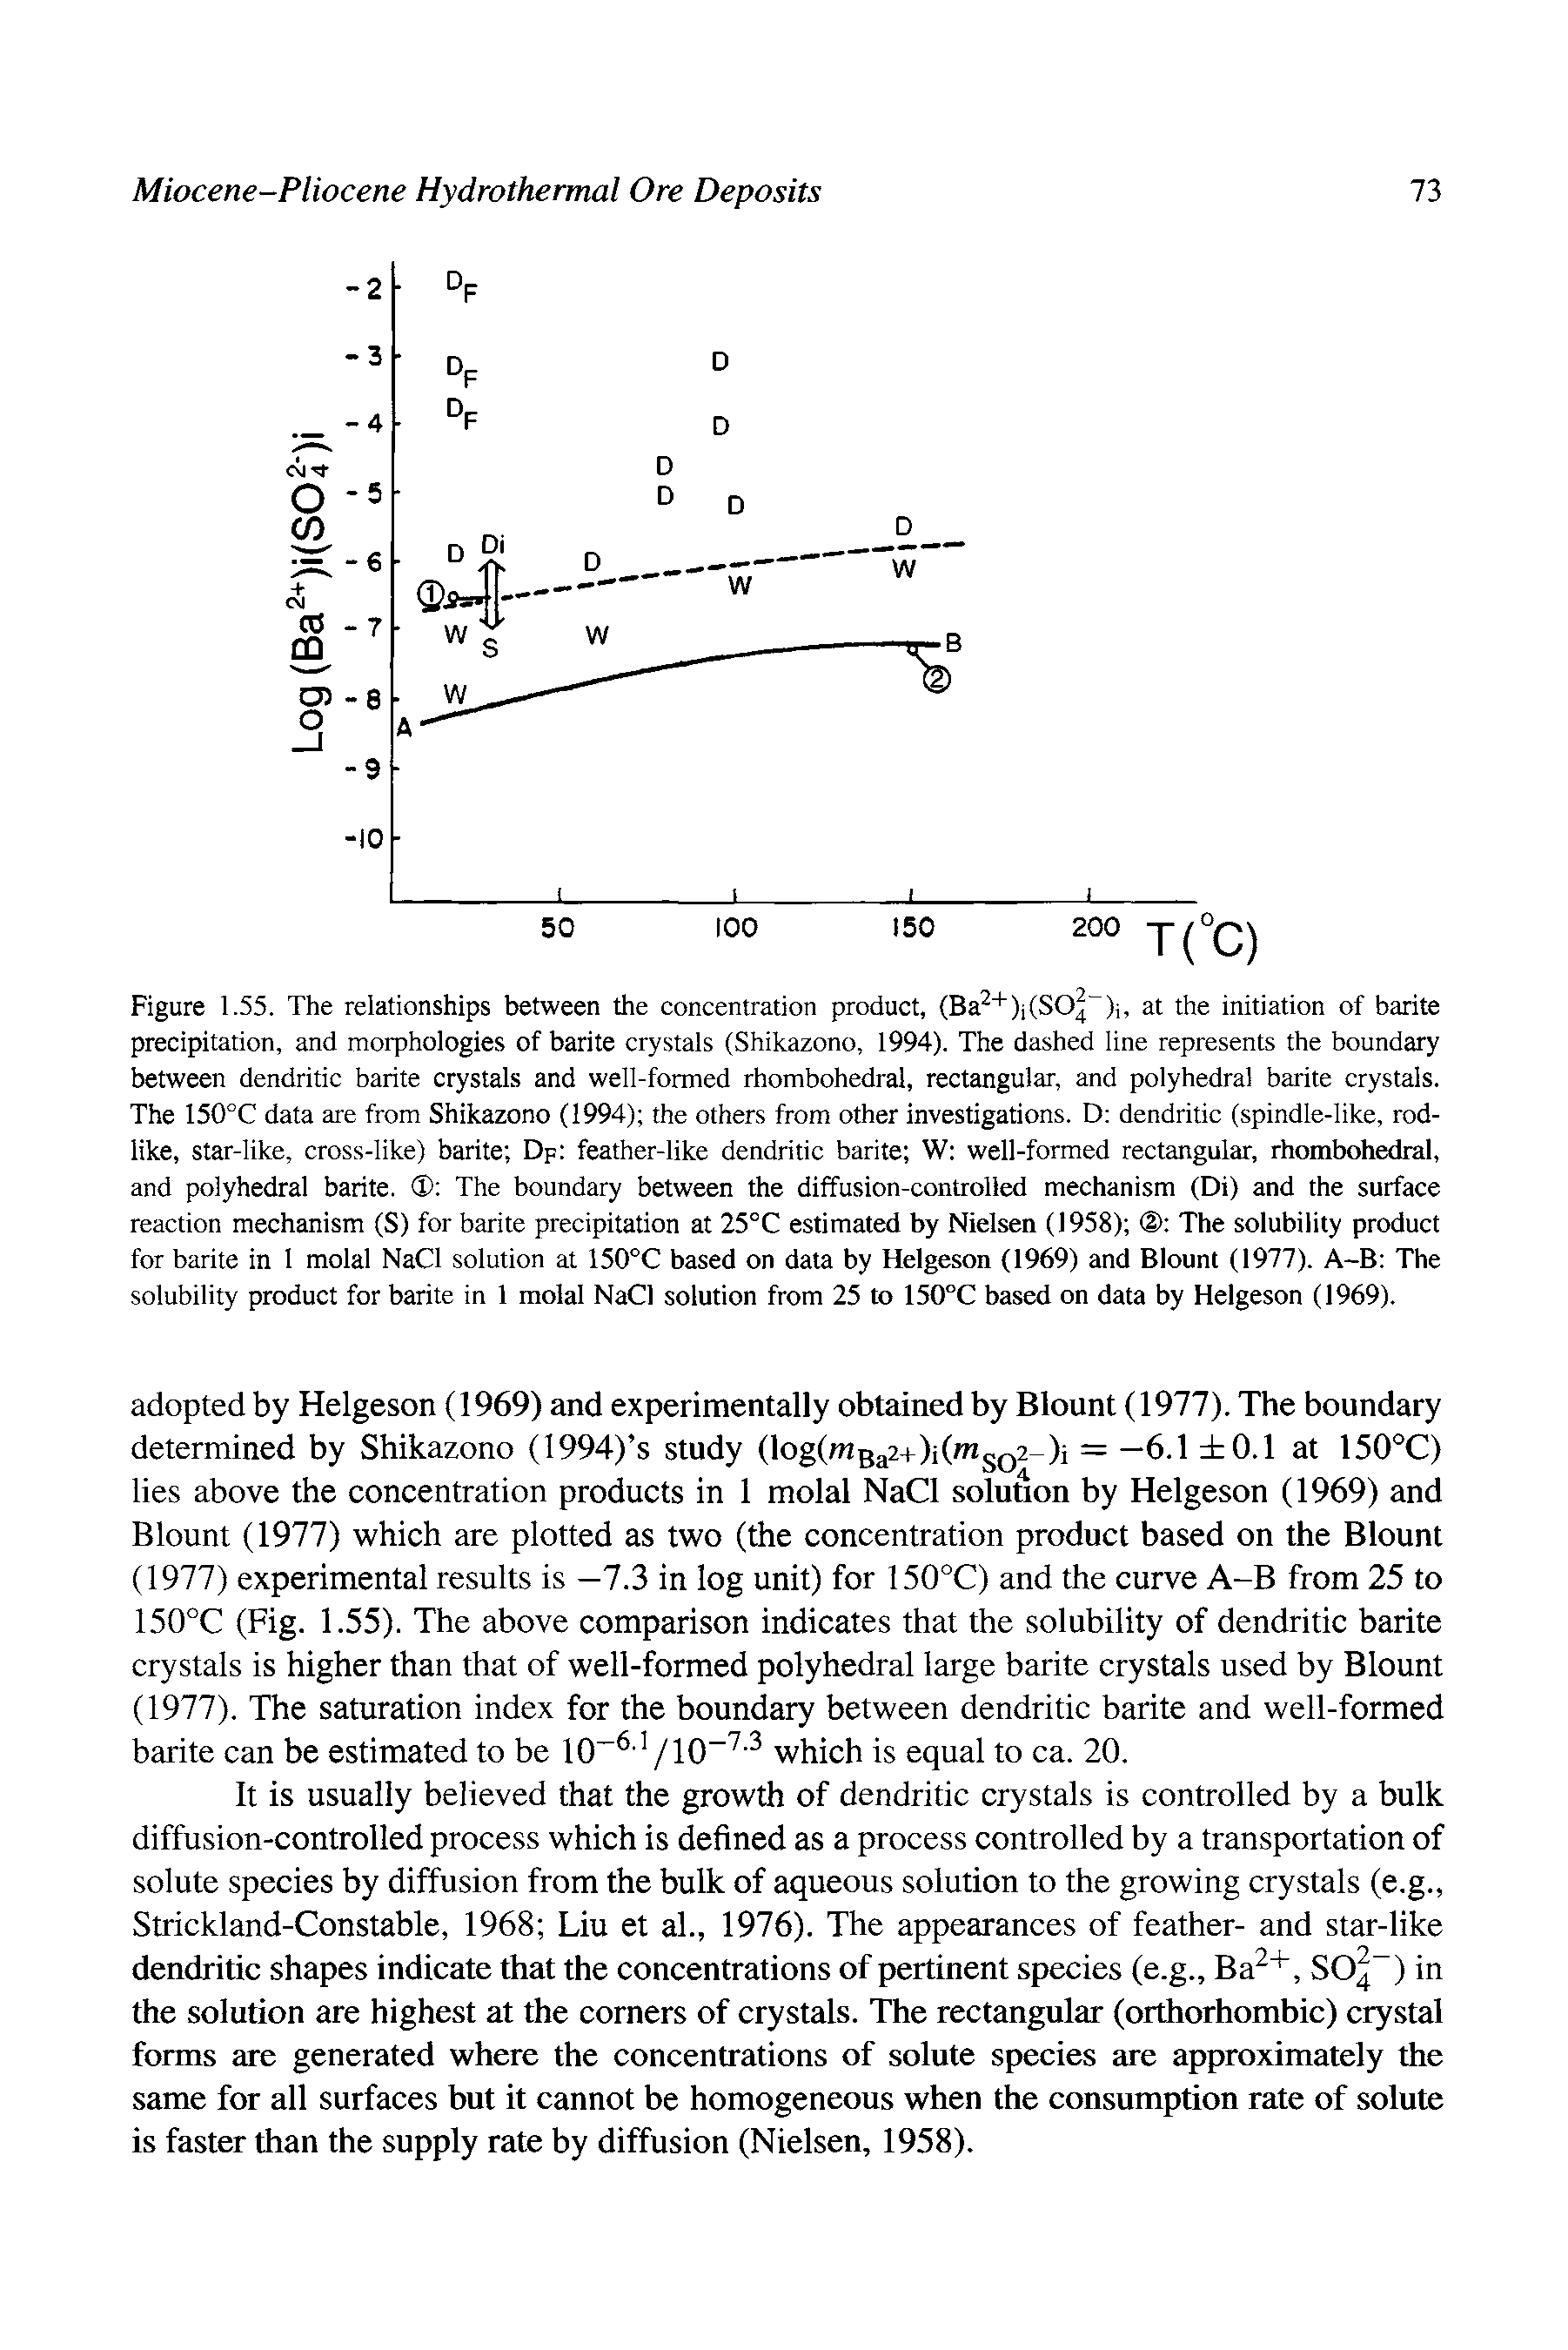 Figure 1.55. The relationships between the concentration product, (Ba " )i(S04 )i, at the initiation of barite precipitation, and morphologies of barite crystals (Shikazono, 1994). The dashed line represents the boundary between dendritic barite crystals and well-formed rhombohedral, rectangular, and polyhedral barite crystals. The 150°C data are from Shikazono (1994) the others from other investigations. D dendritic (spindle-like, rodlike, star-like, cross-like) barite Dp feather-like dendritic barite W well-formed rectangular, rhombohedral, and polyhedral barite. The boundary between the diffusion-controlled mechanism (Di) and the surface reaction mechanism (S) for barite precipitation at 25°C estimated by Nielsen (1958) The solubility product for barite in 1 molal NaCl solution at 150°C based on data by Helgeson (1969) and Blount (1977). A-B The solubility product for barite in 1 molal NaCl solution from 25 to 150°C based on data by Helgeson (1969).